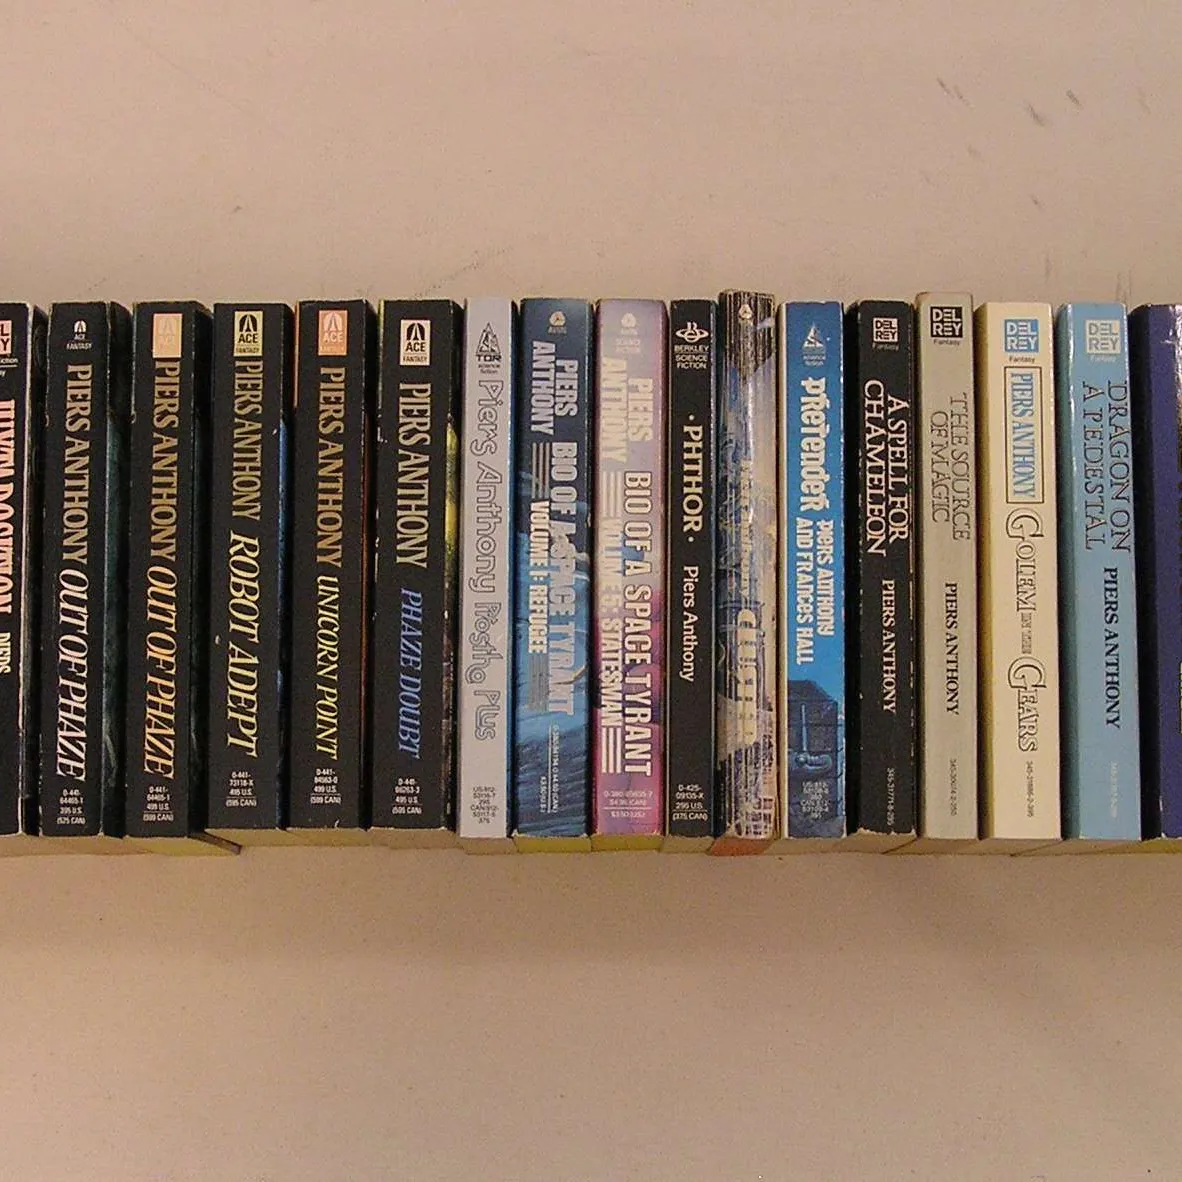 Paperbacks by Piers Anthony photo 1